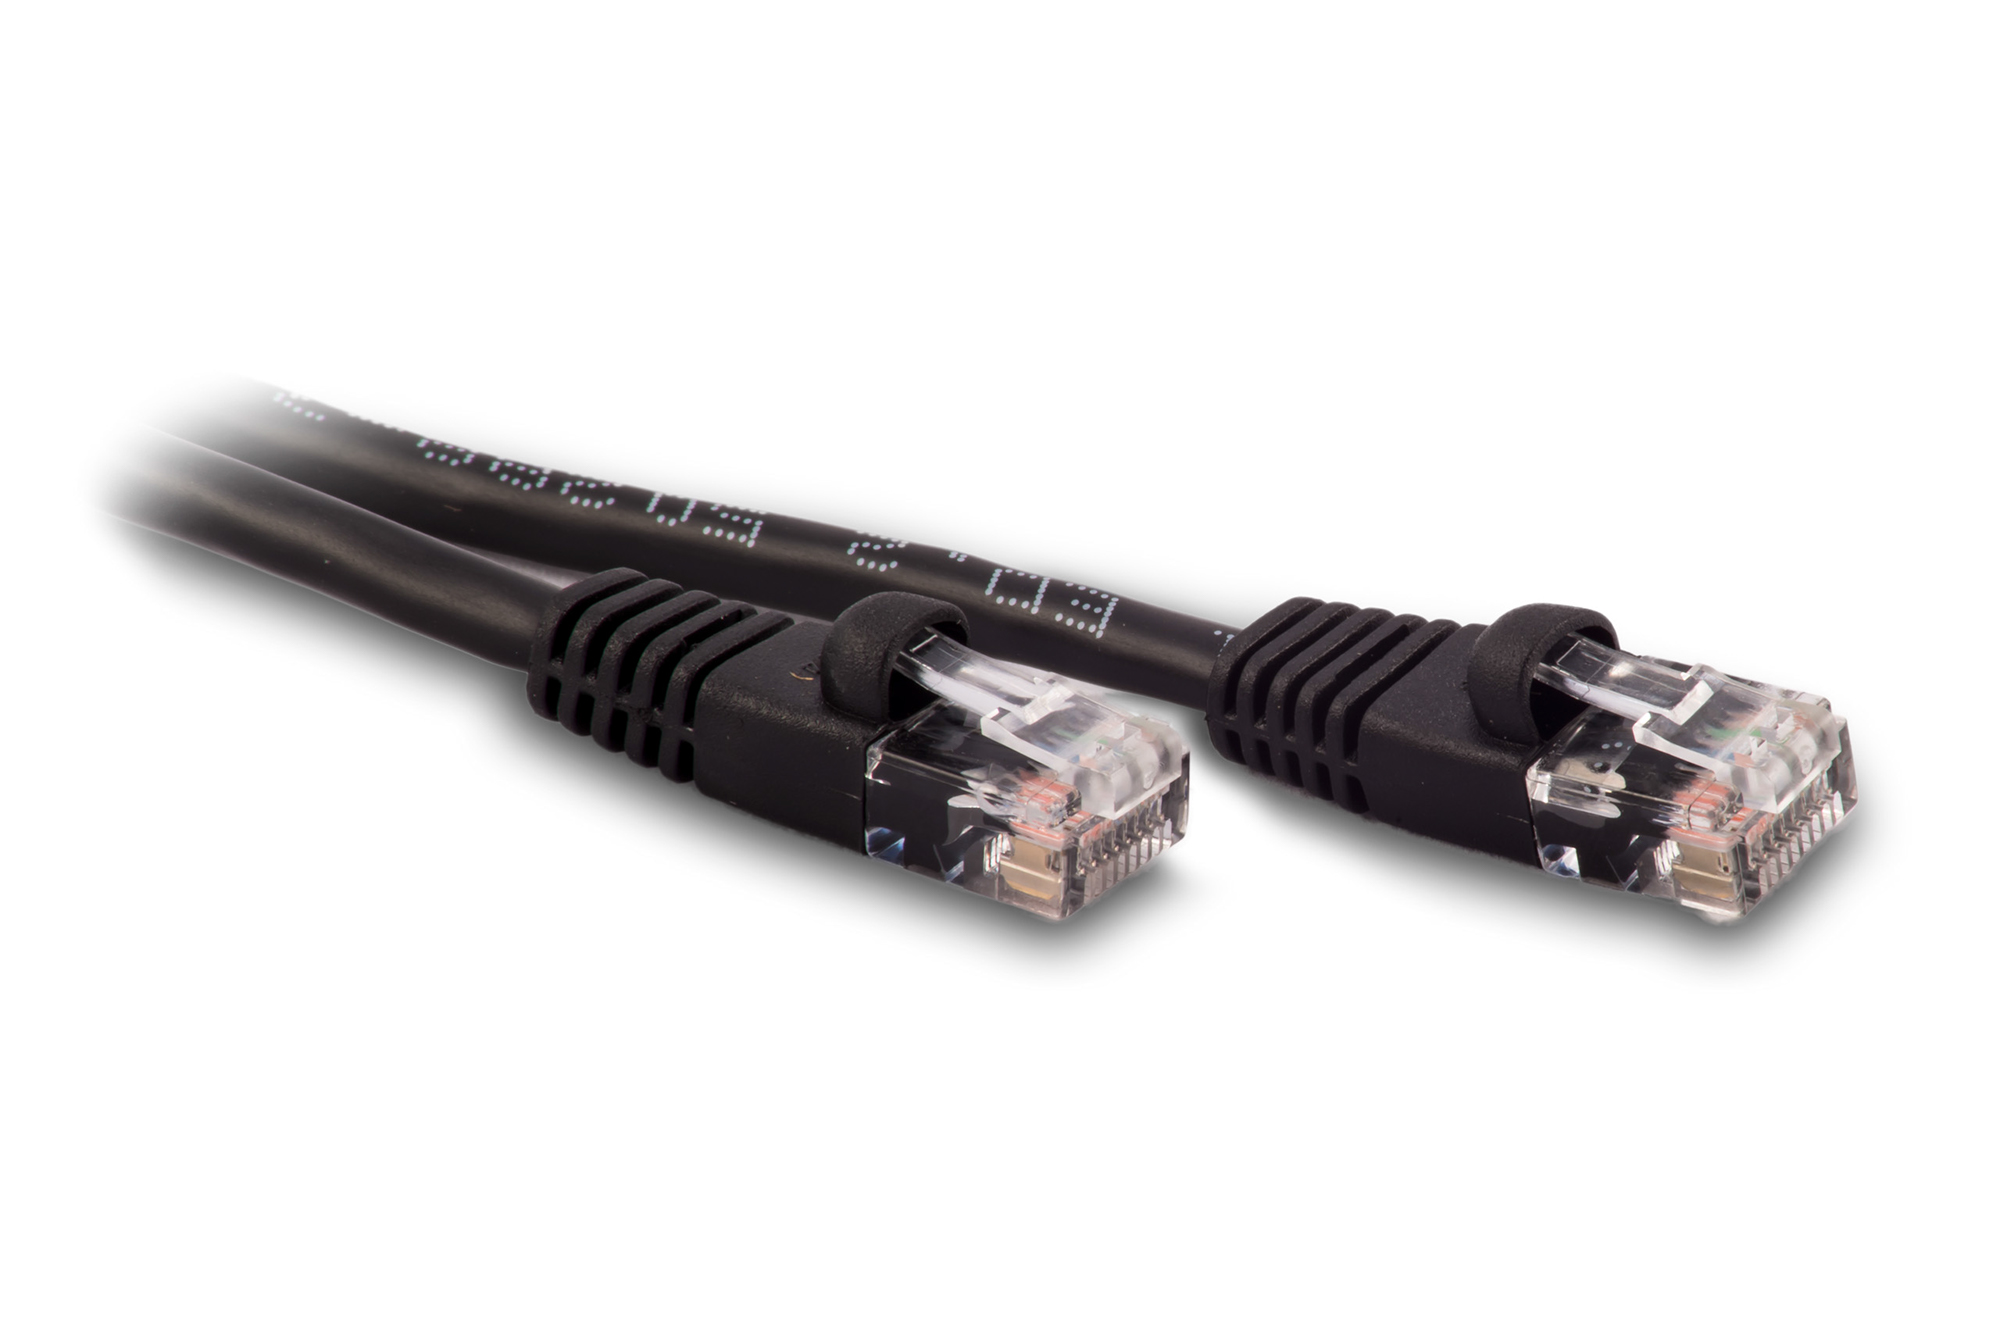 75ft Cat5e Ethernet Patch Cable - Black Color - Snagless Boot